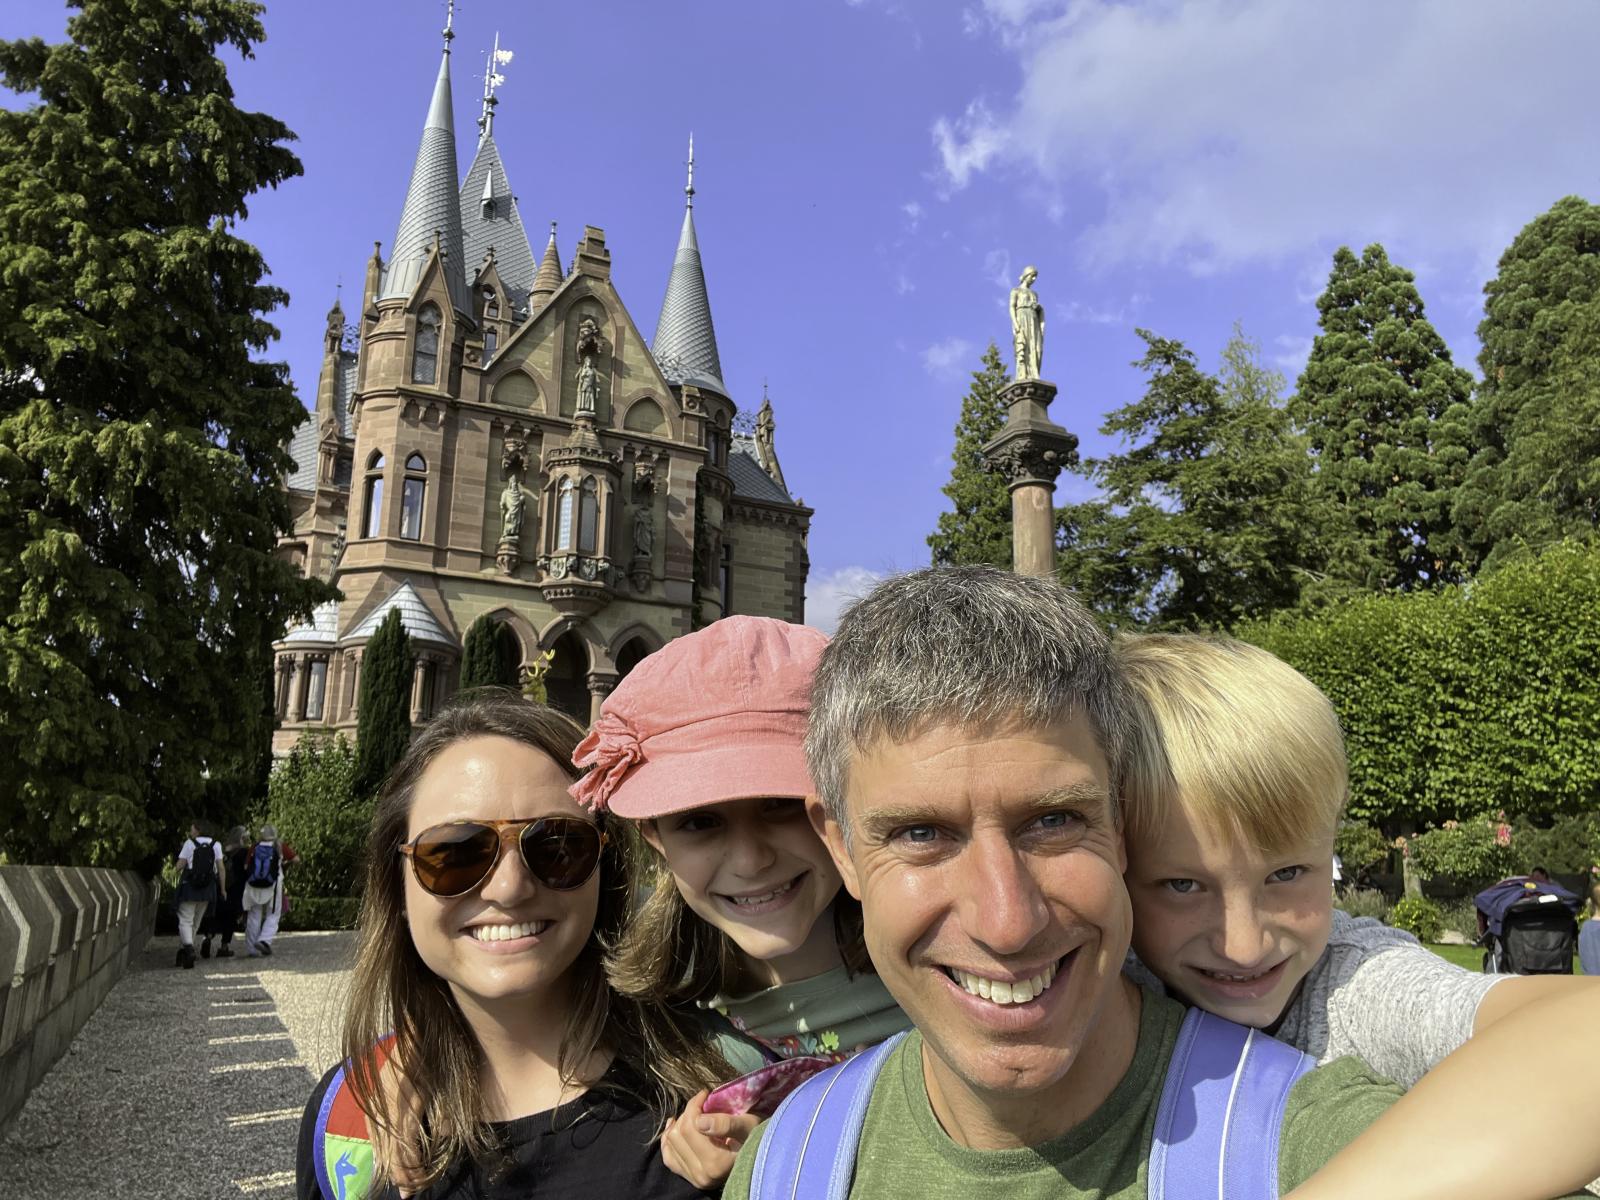 Alex Zupan and his family go sightseeing at Schloss Drachenburg, south of Bonn, Germany